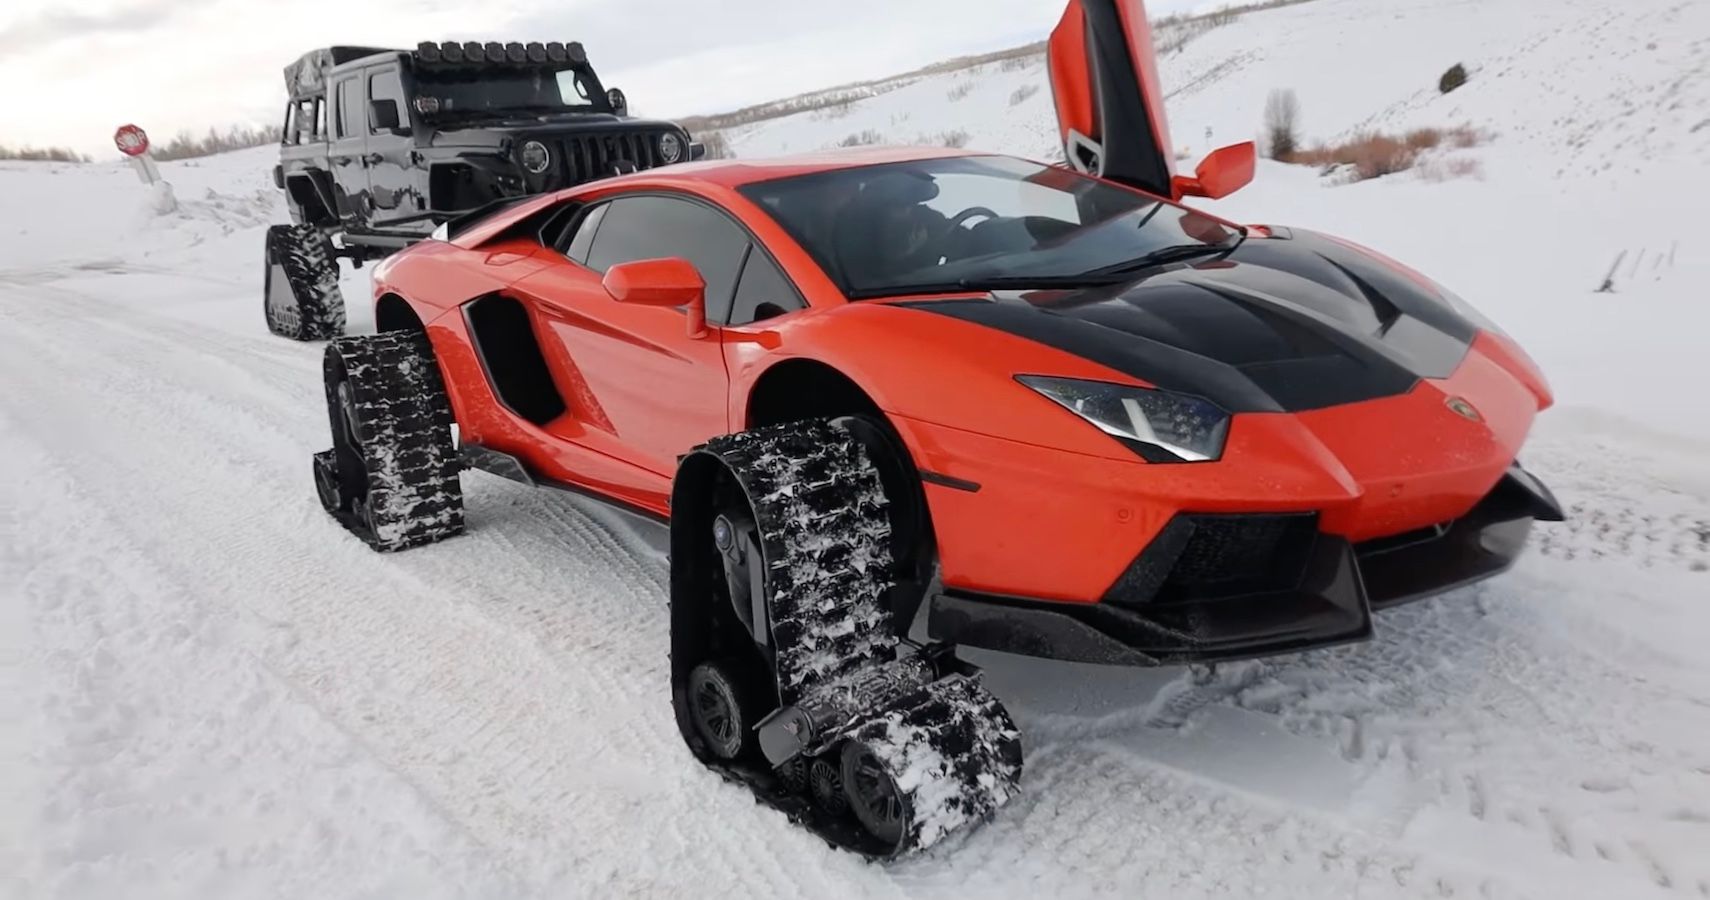 YouTuber's Lamborghini Aventador Gets Snow Tracks: What Could Possibly Go Wrong?